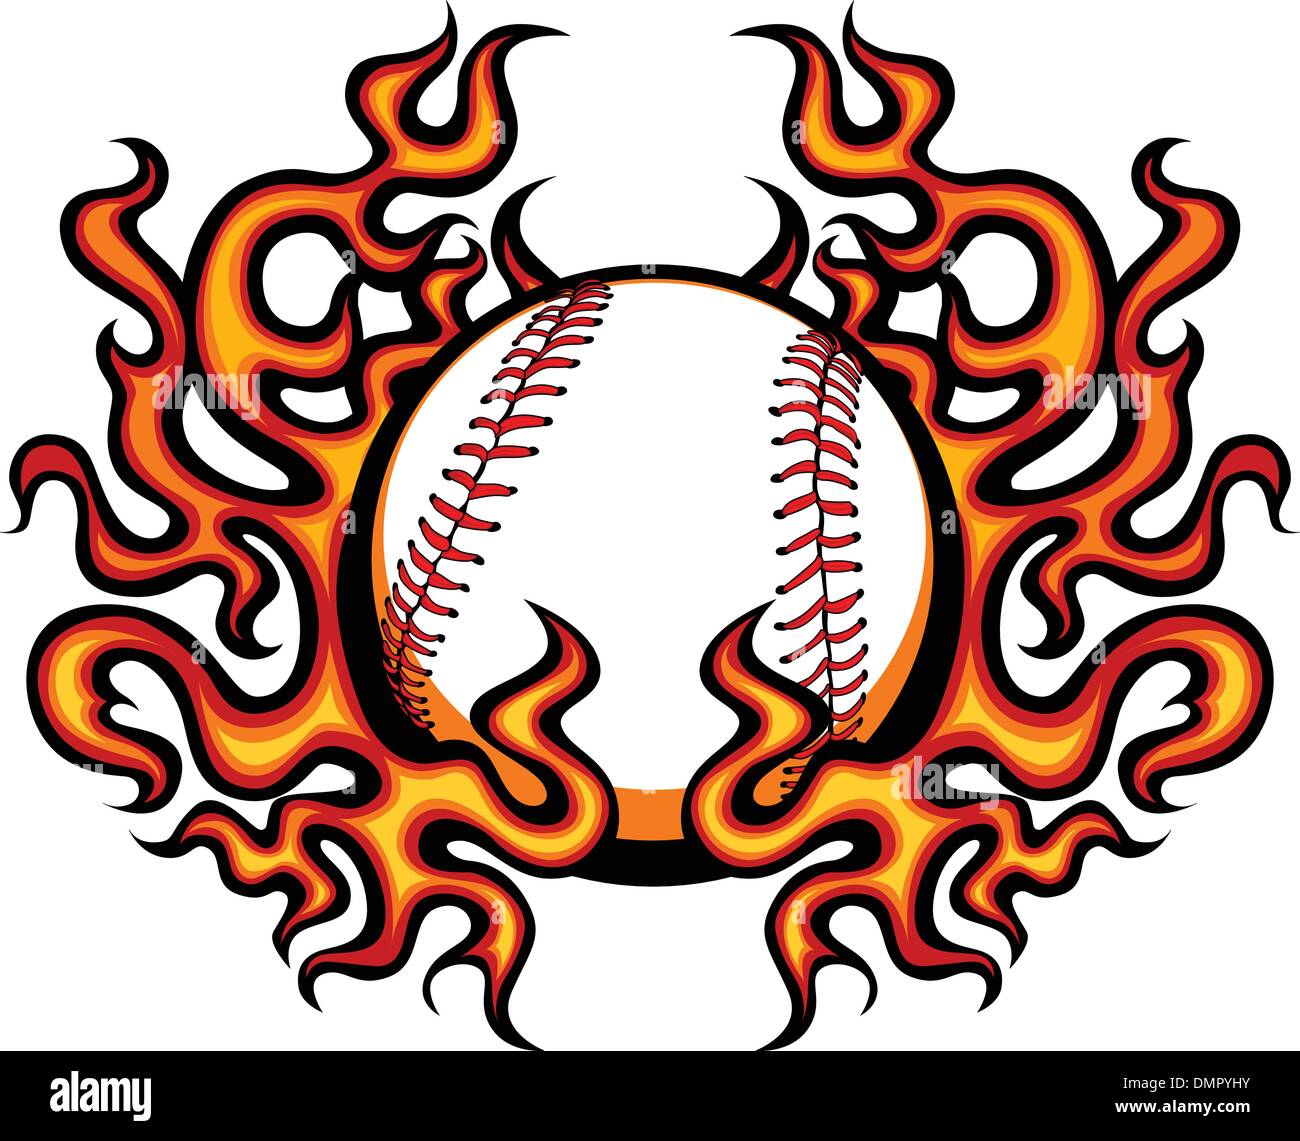 Baseball Template with Flames Vector Image Stock Vector